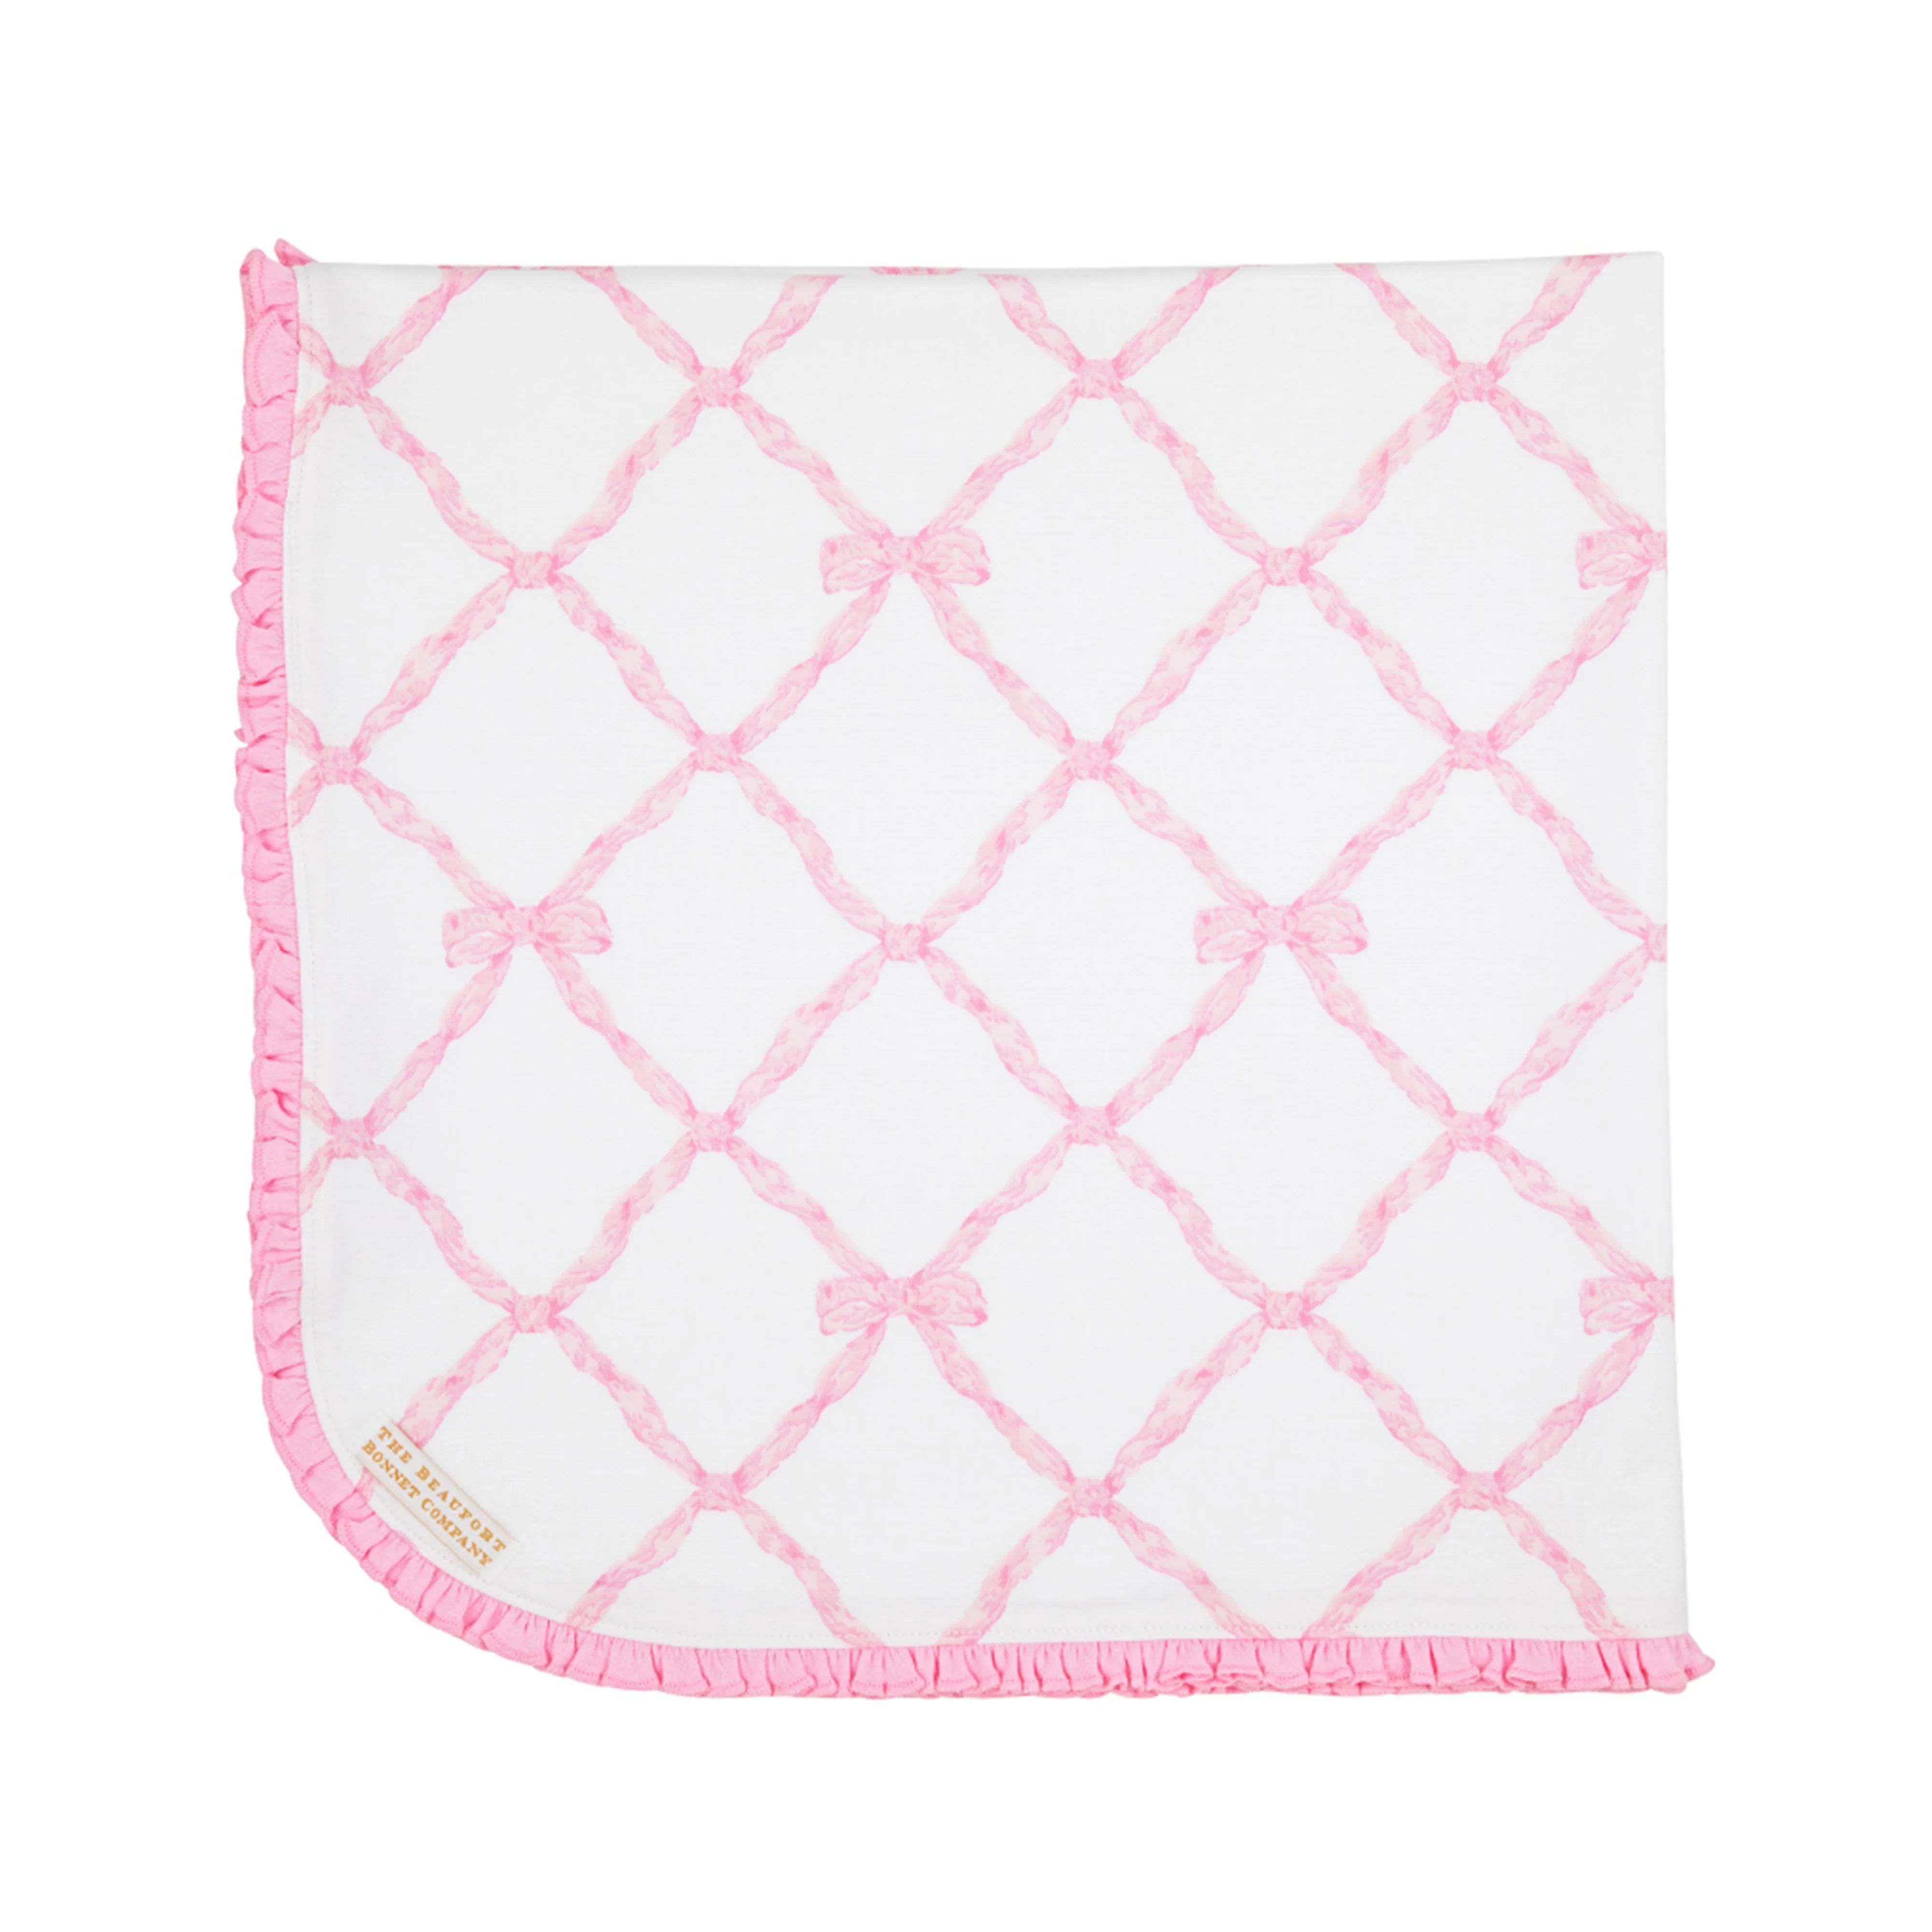 Baby Buggy Blanket - Belle Meade Bow with Pier Party Pink | The Beaufort Bonnet Company